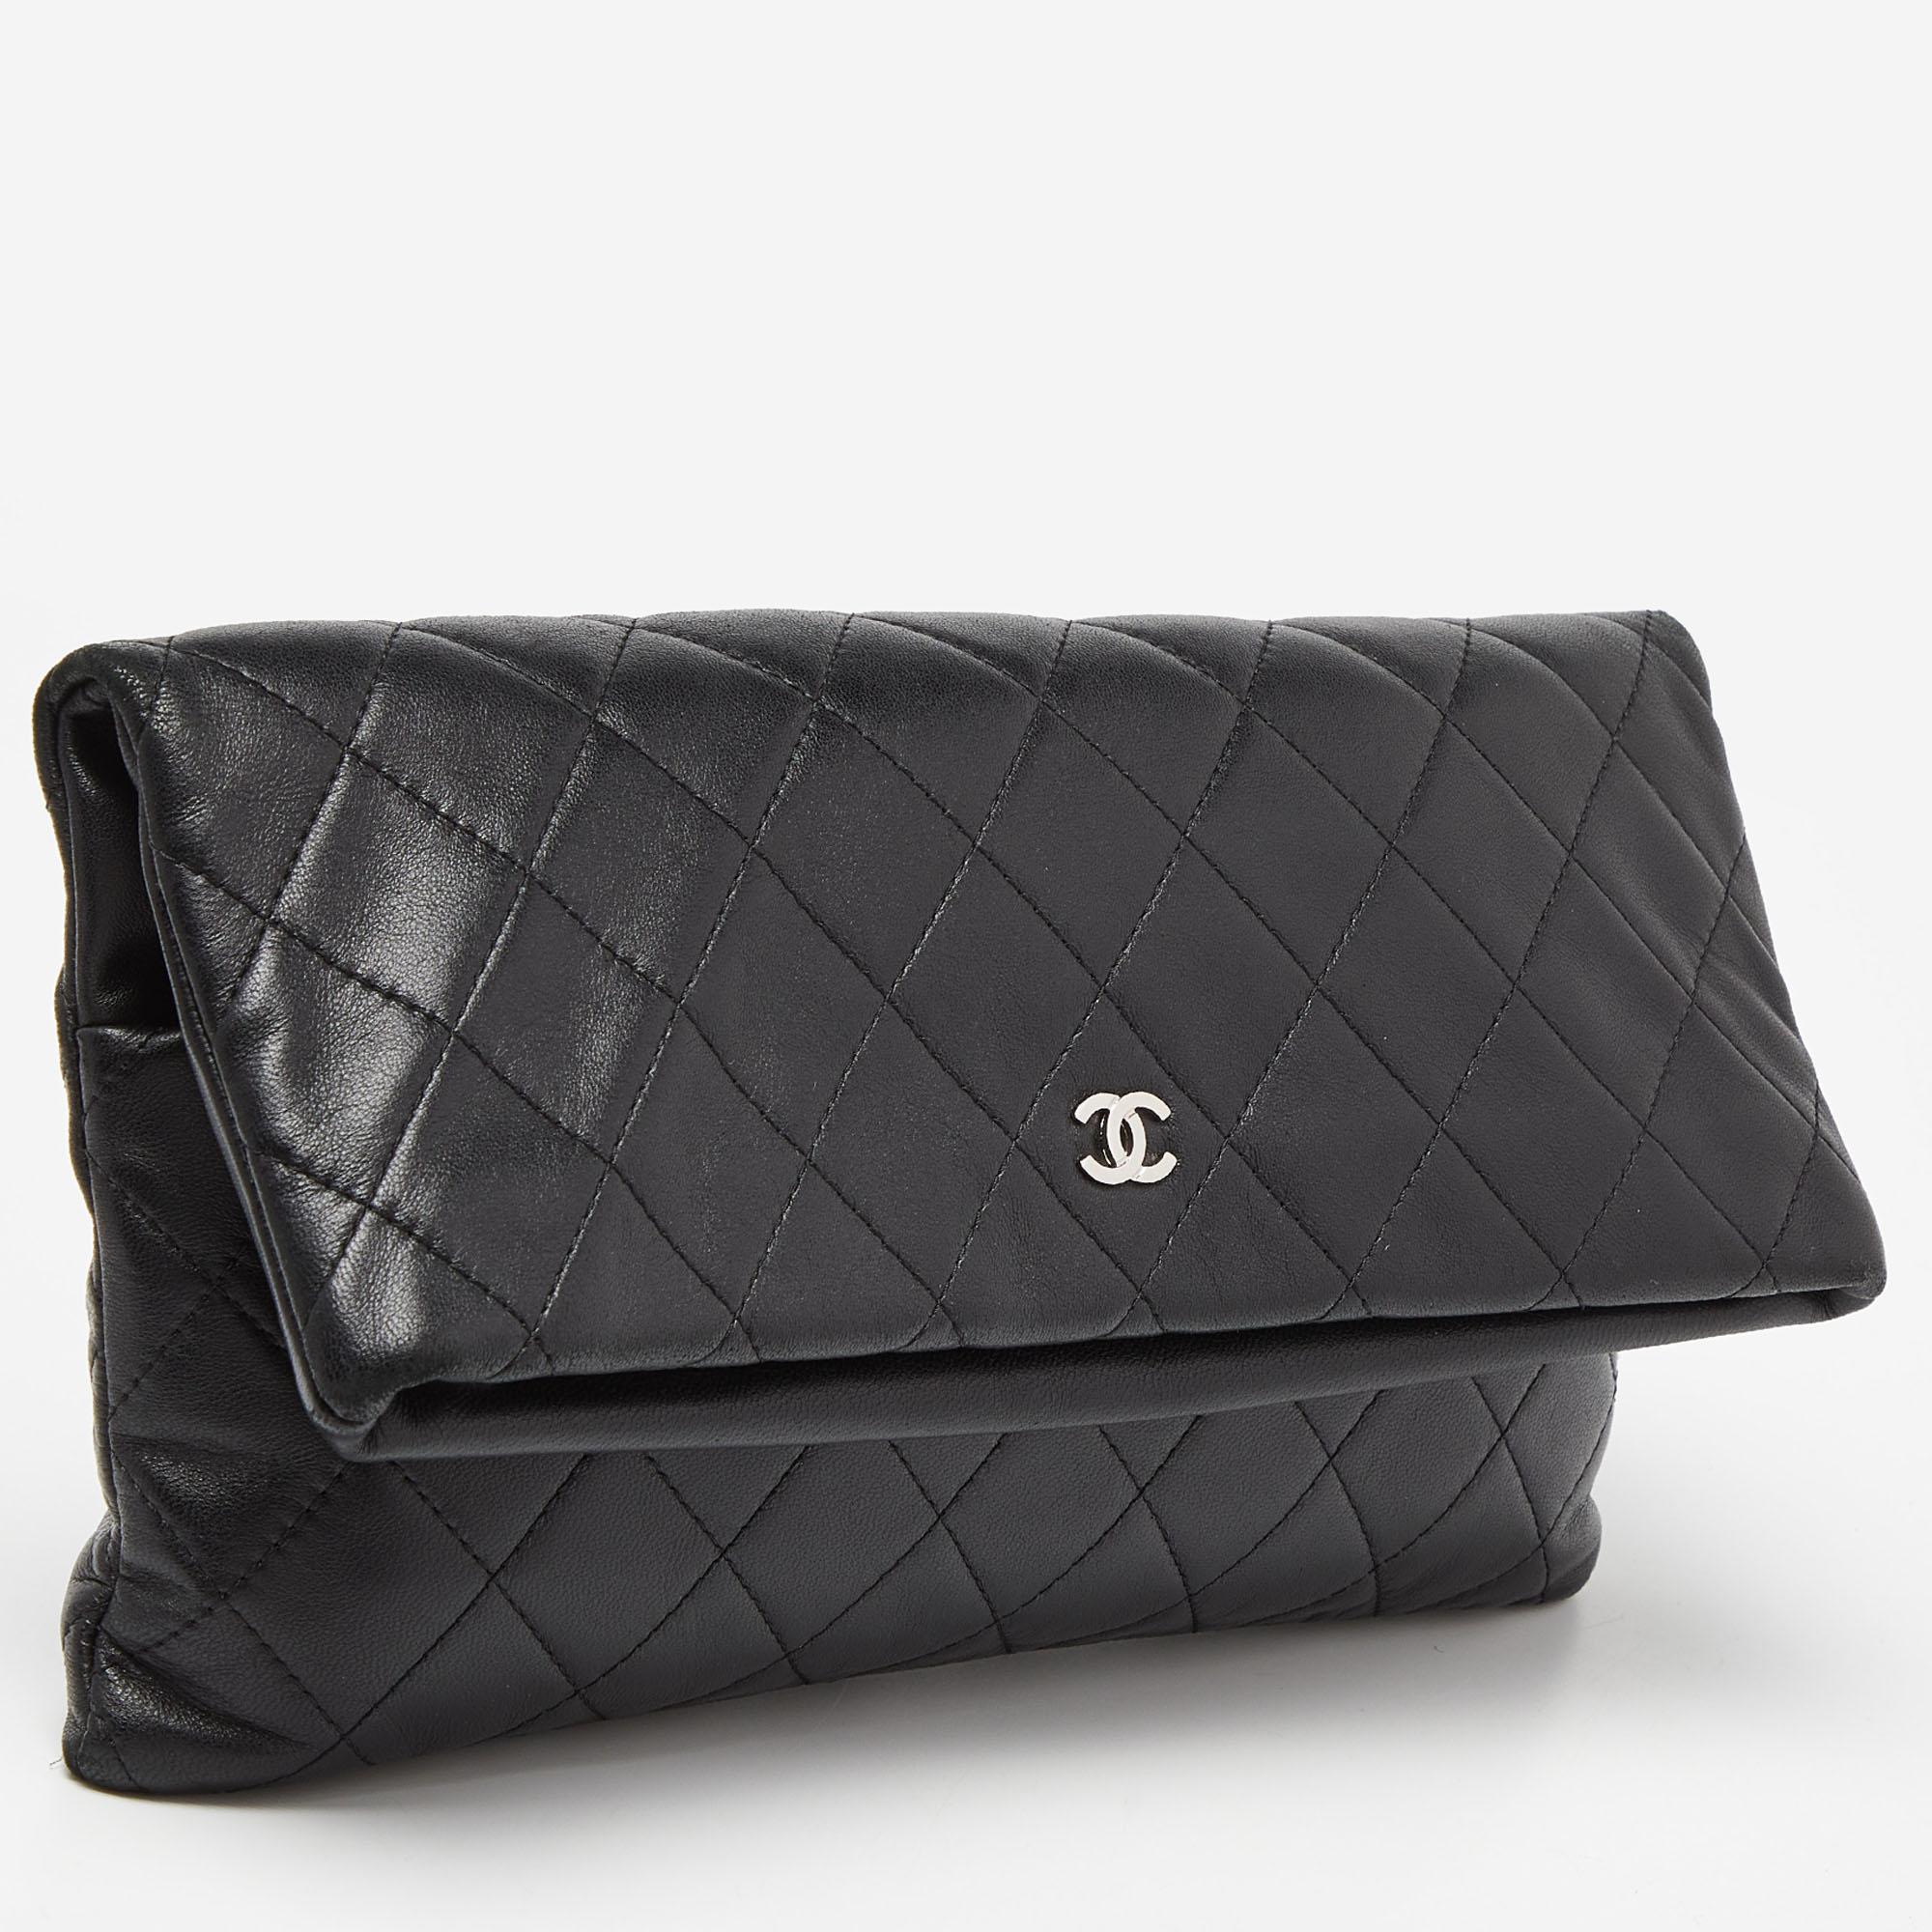 Women's Chanel Black Quilted Lambskin Leather Beauty CC Clutch